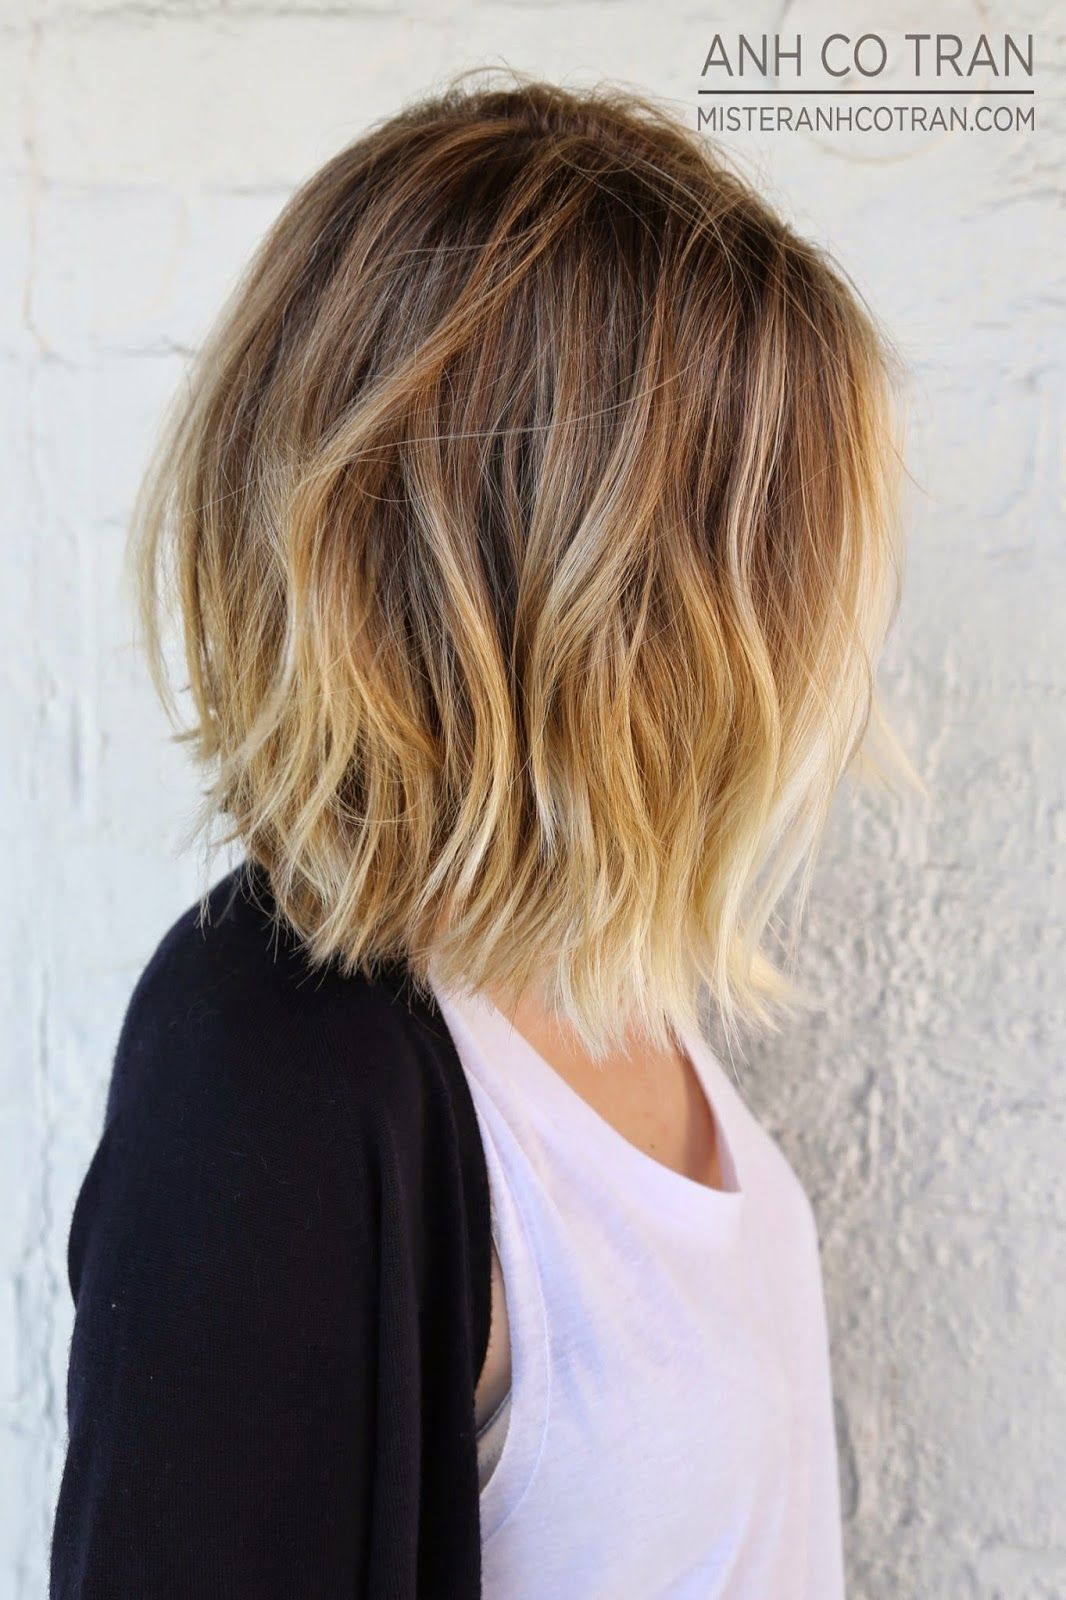 GREAT HAIR LIVES AT RAMIREZ|TRAN SALON IN BEVERLY HILLS. Cut/Style: Anh Co Tran.